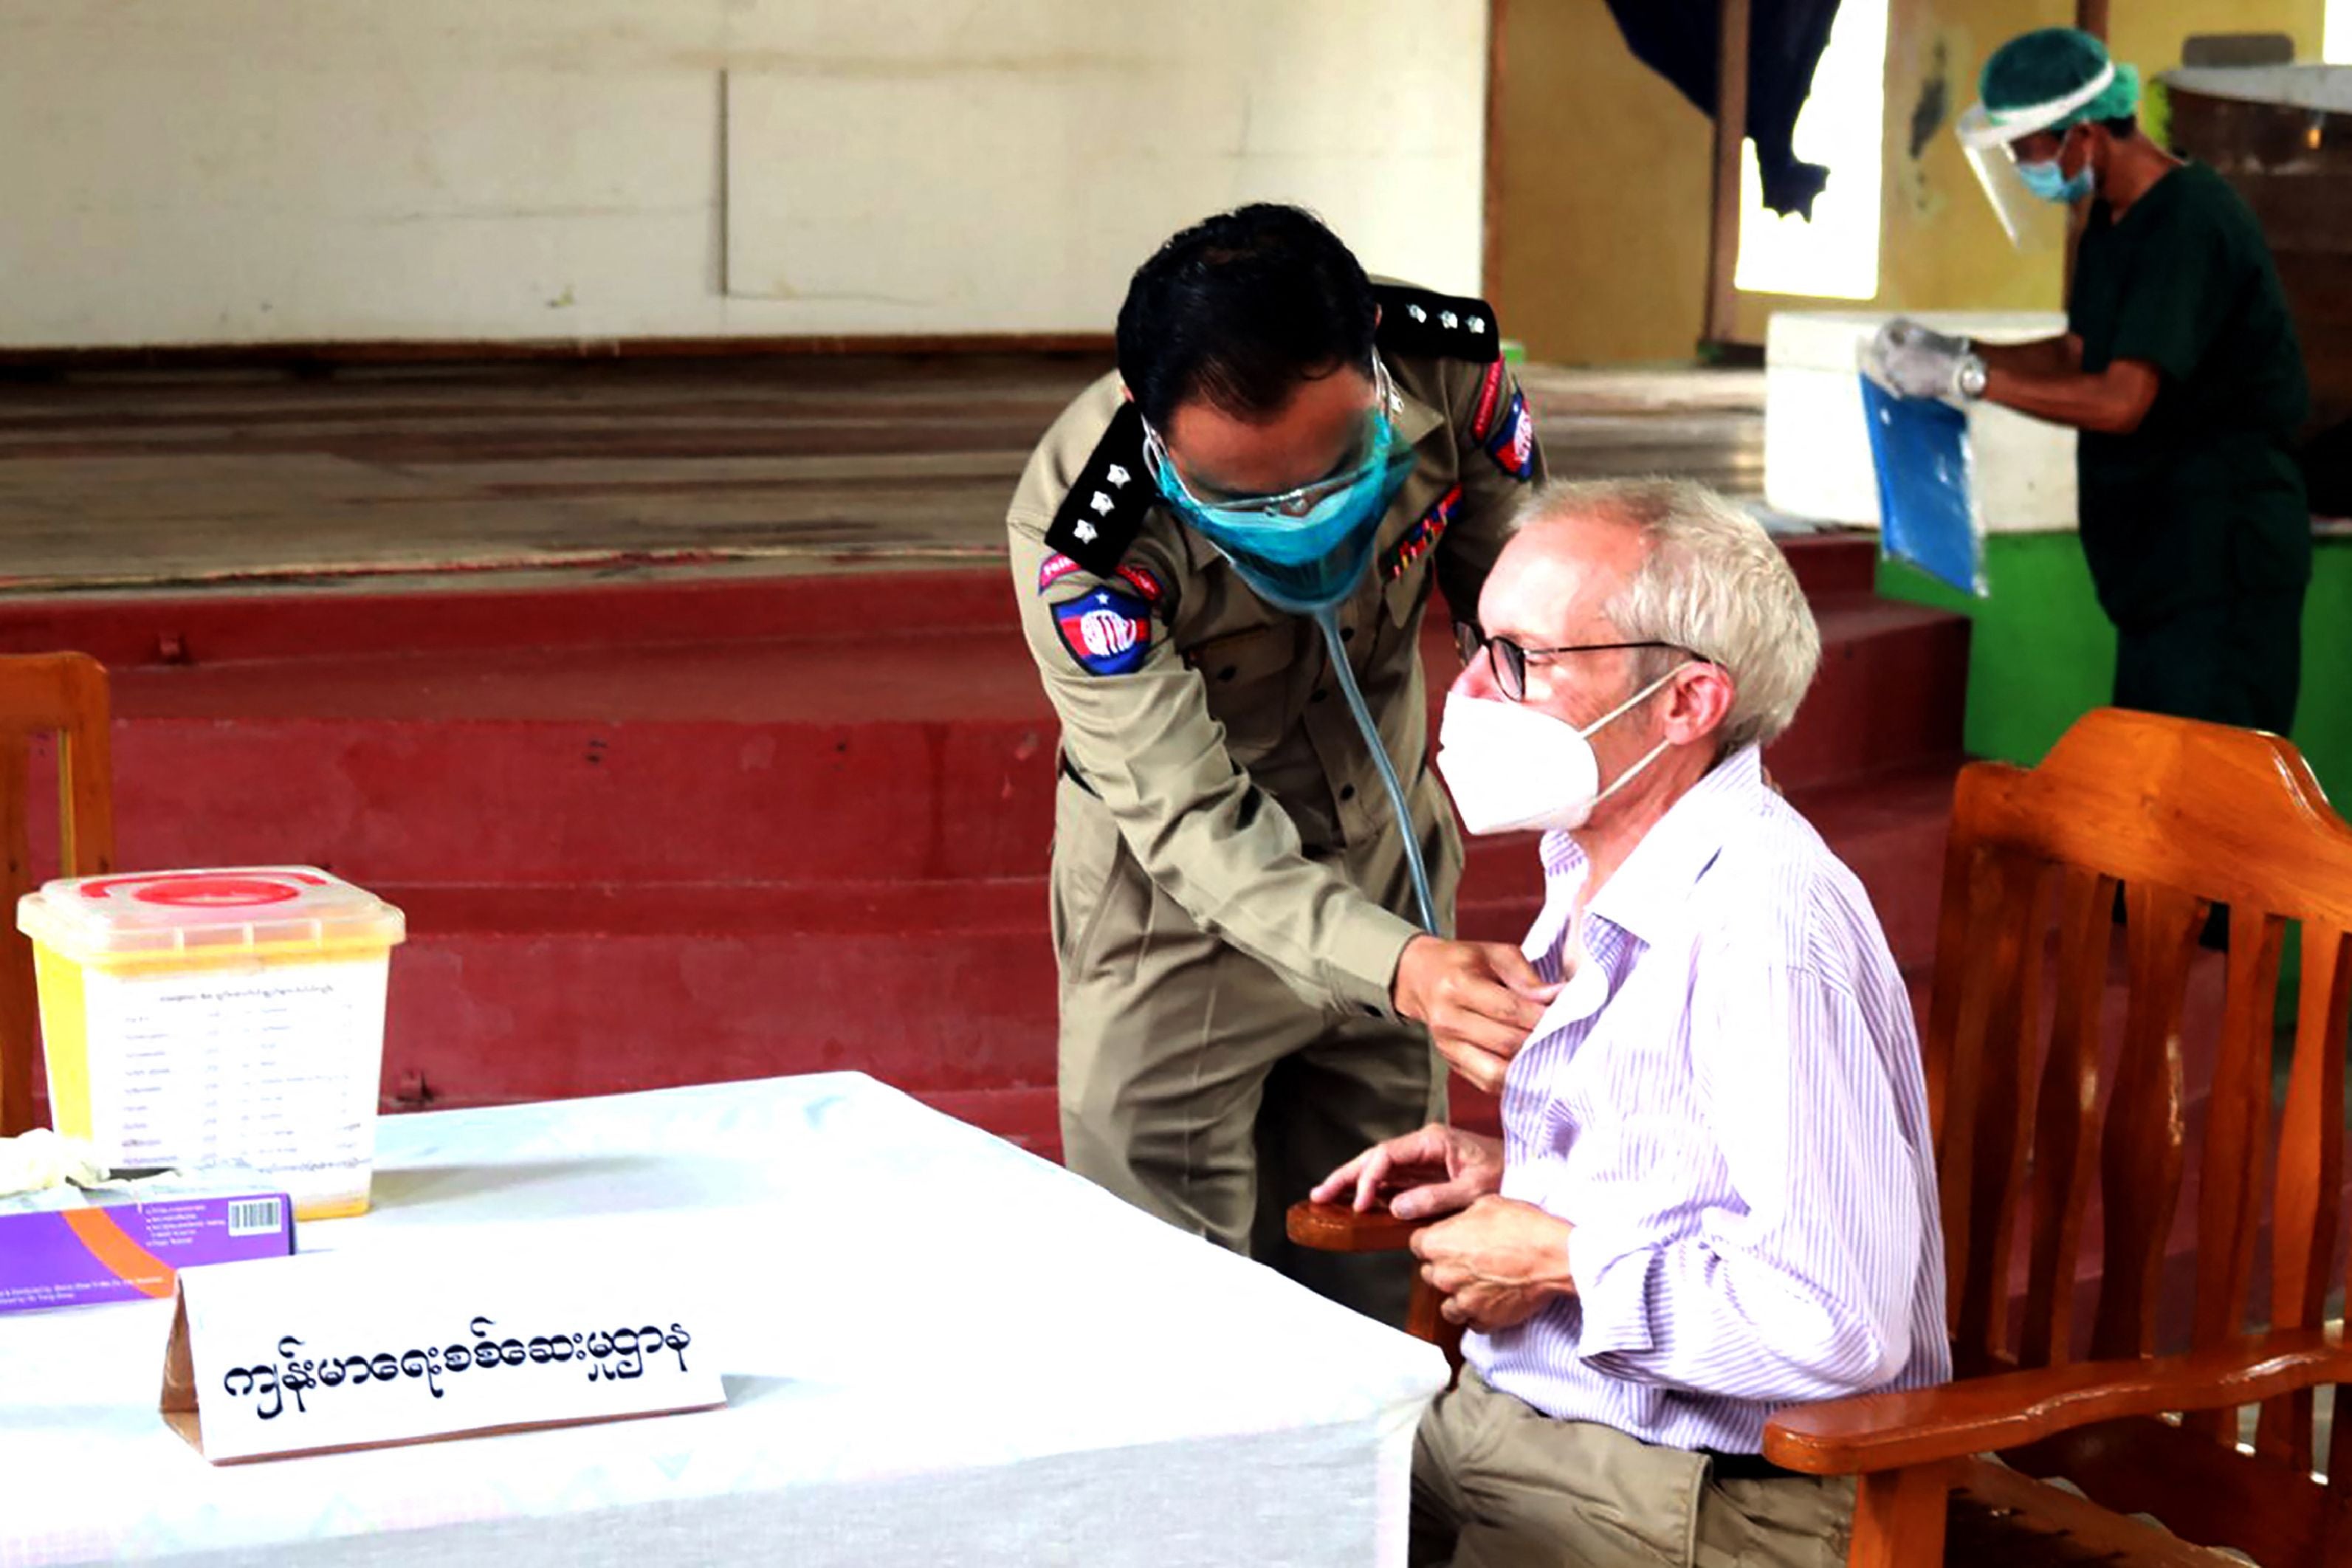 File photo: Sean Turnell, a detained Australian adviser to Myanmar’s deposed leader Aung San Suu Kyi, getting vaccinated in Insein prison in Yangon on 28 July 2021